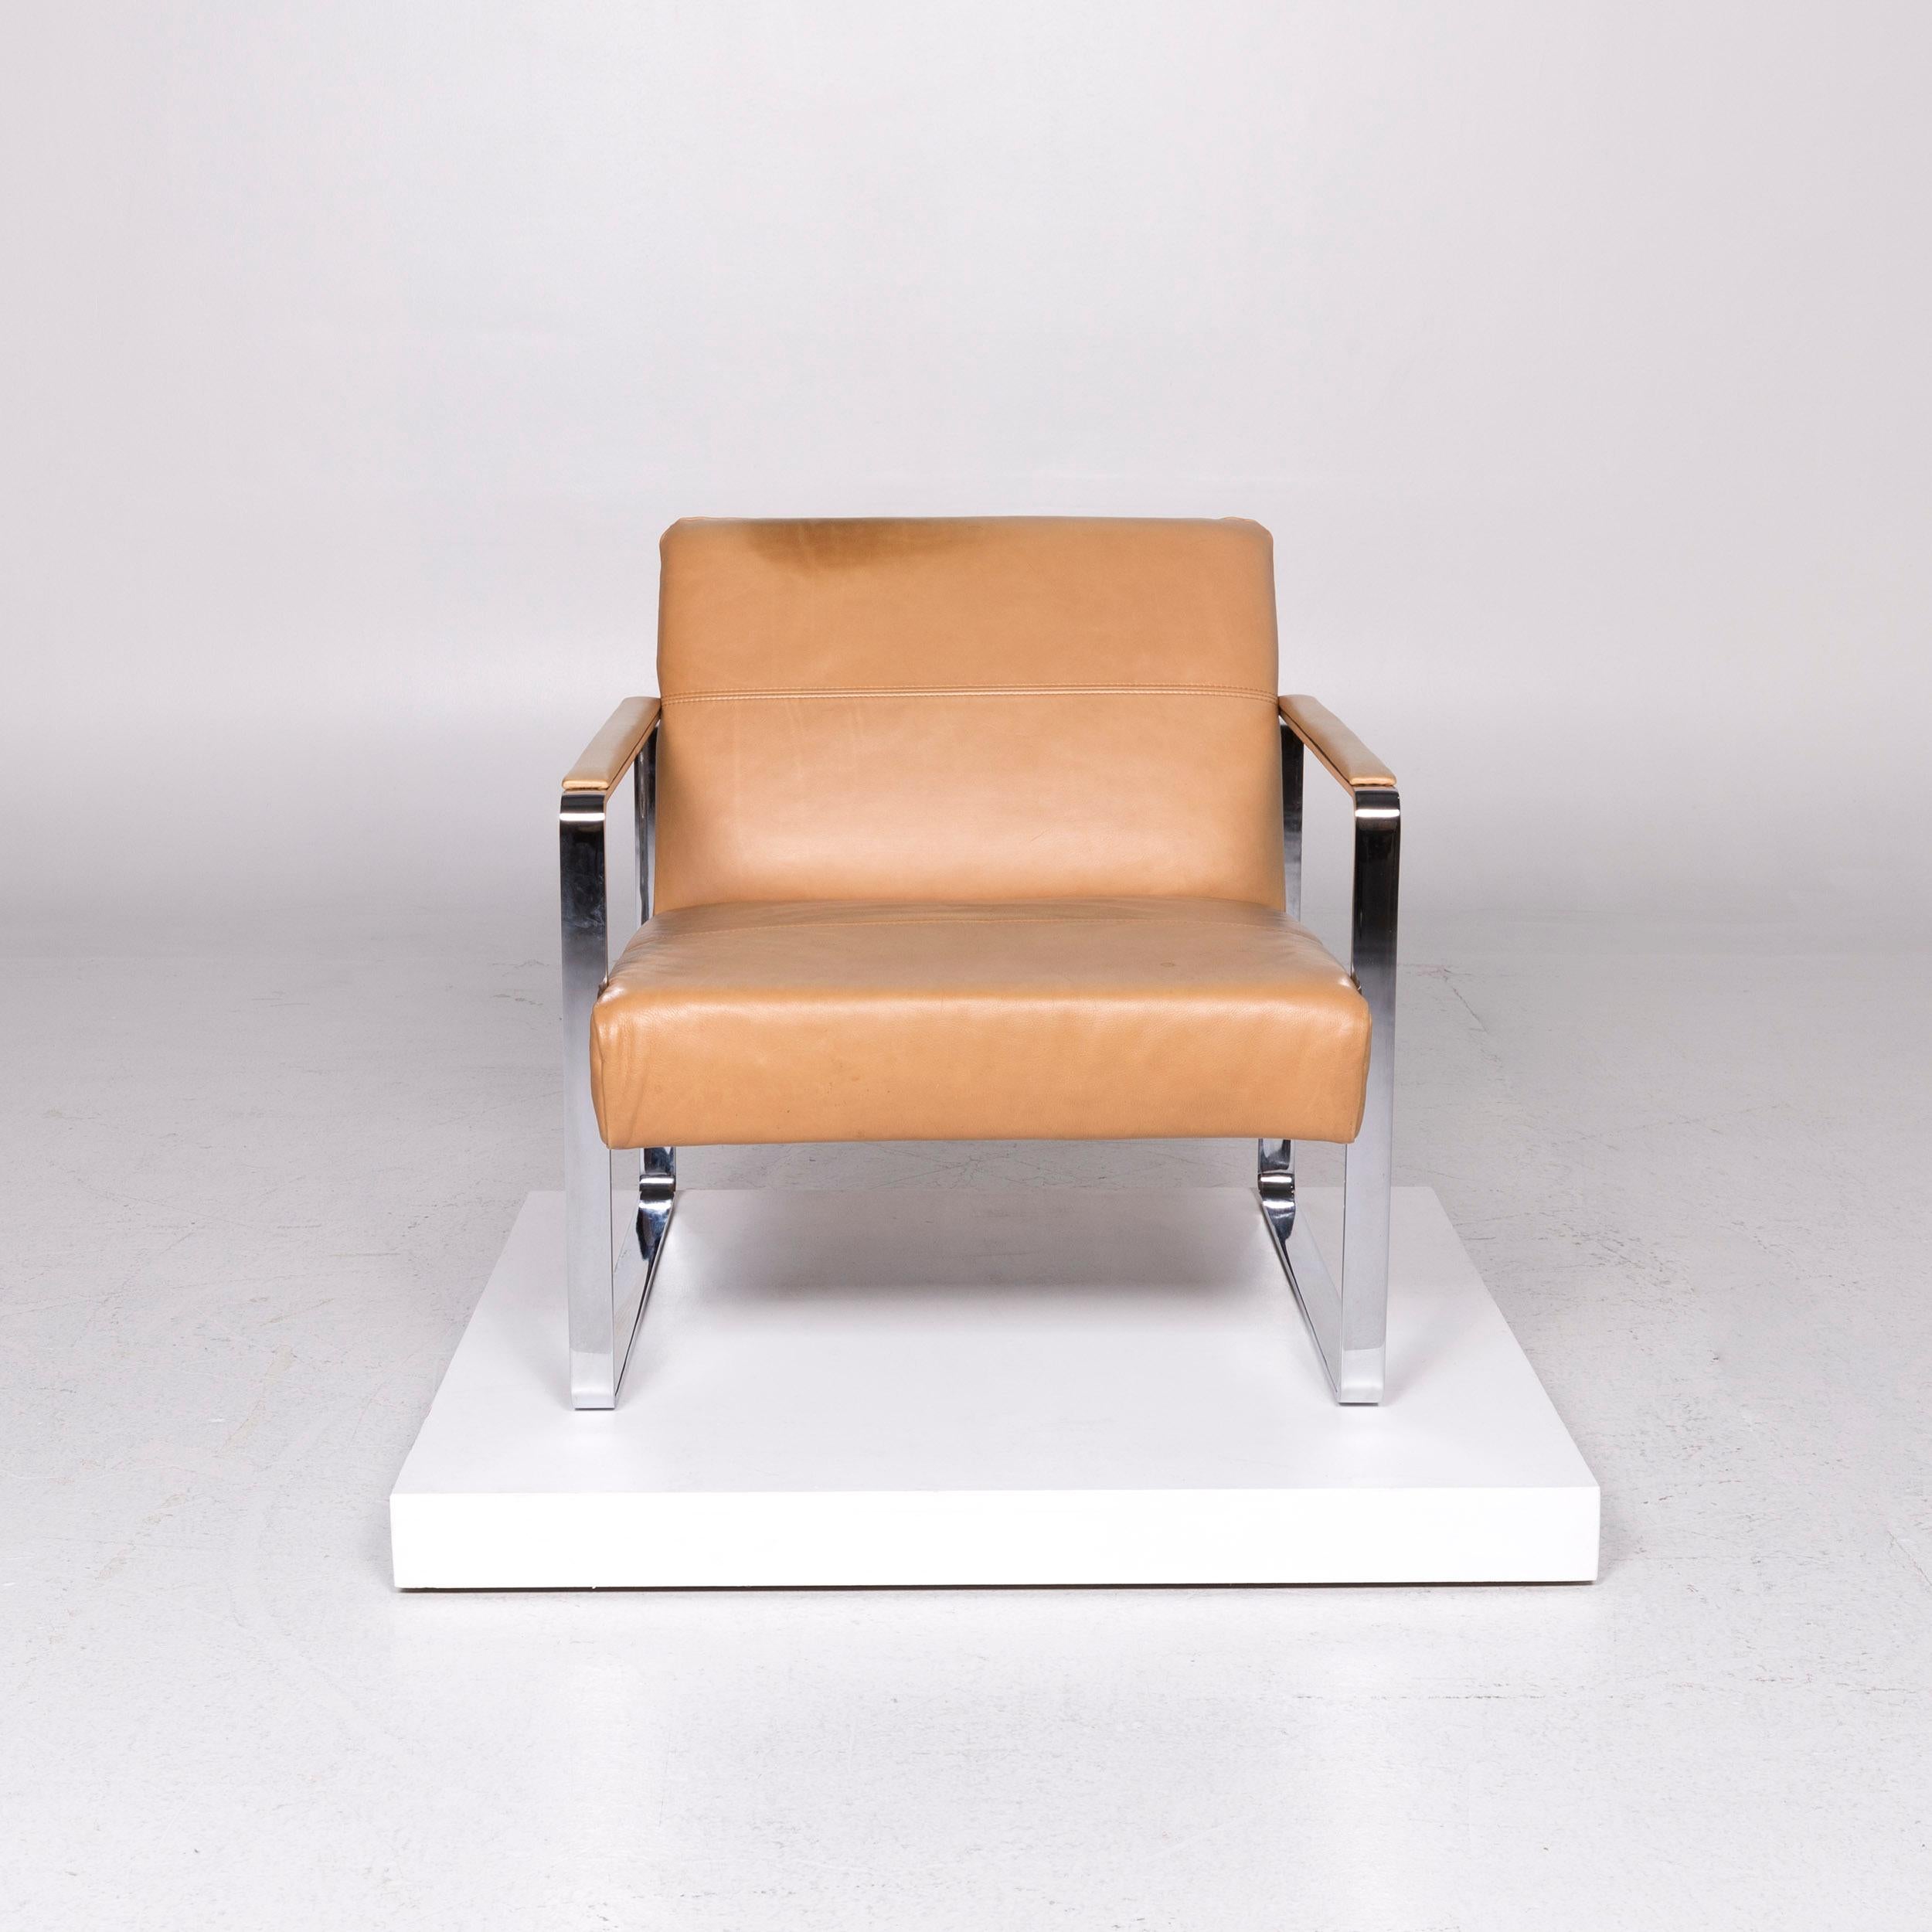 We bring to you a BoConcept ross leather armchair beige.
 

Product measurements in centimetres:
 

Depth 88
Width 71
Height 74
Seat-height 40
Rest-height 57
Seat-depth 59
Seat-width 64
Back-height 36.
 